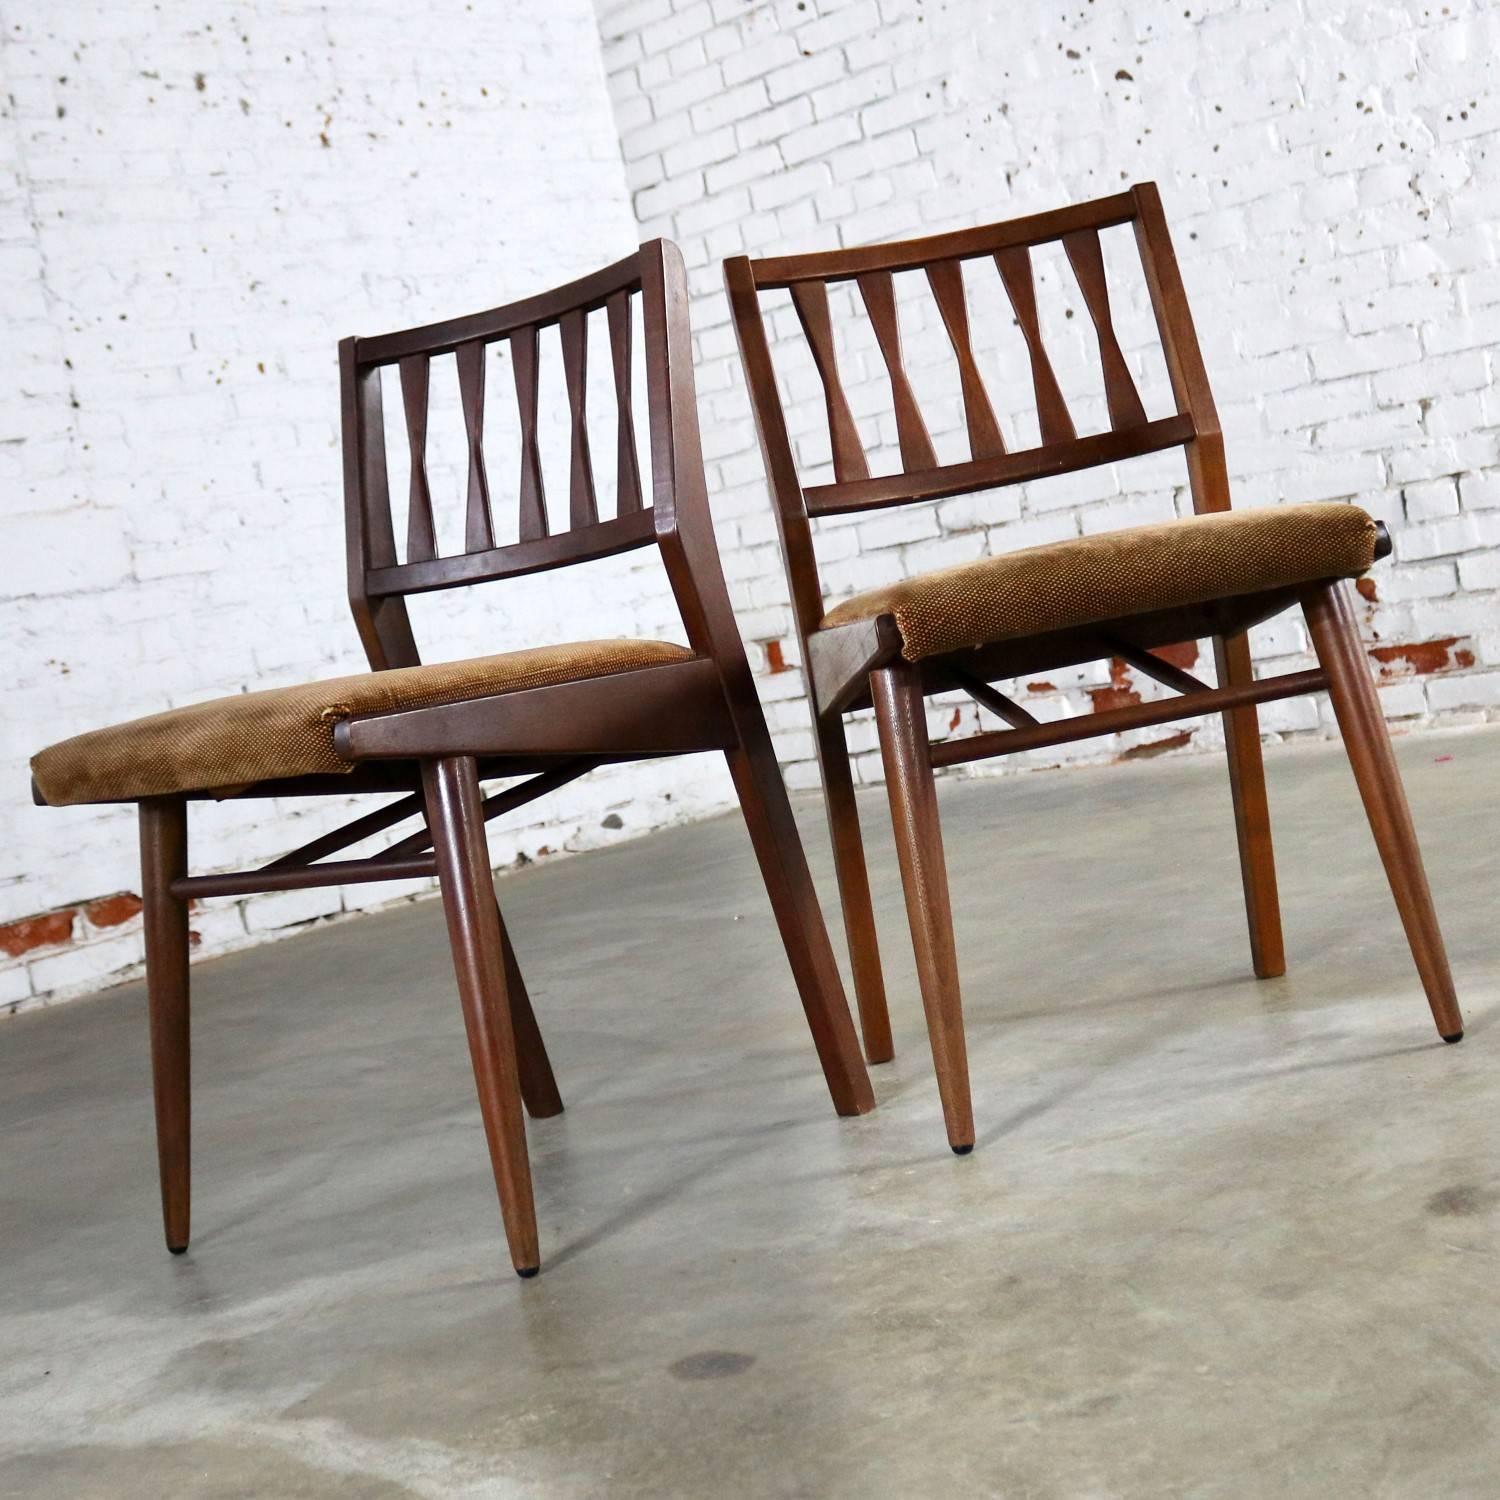 Great pair of armless dining side chairs in walnut with upholstered seats by the Holman Manufacturing Co. They are in wonderful vintage condition with what looks like the original upholstery with normal wear for age and no outstanding flaws, circa